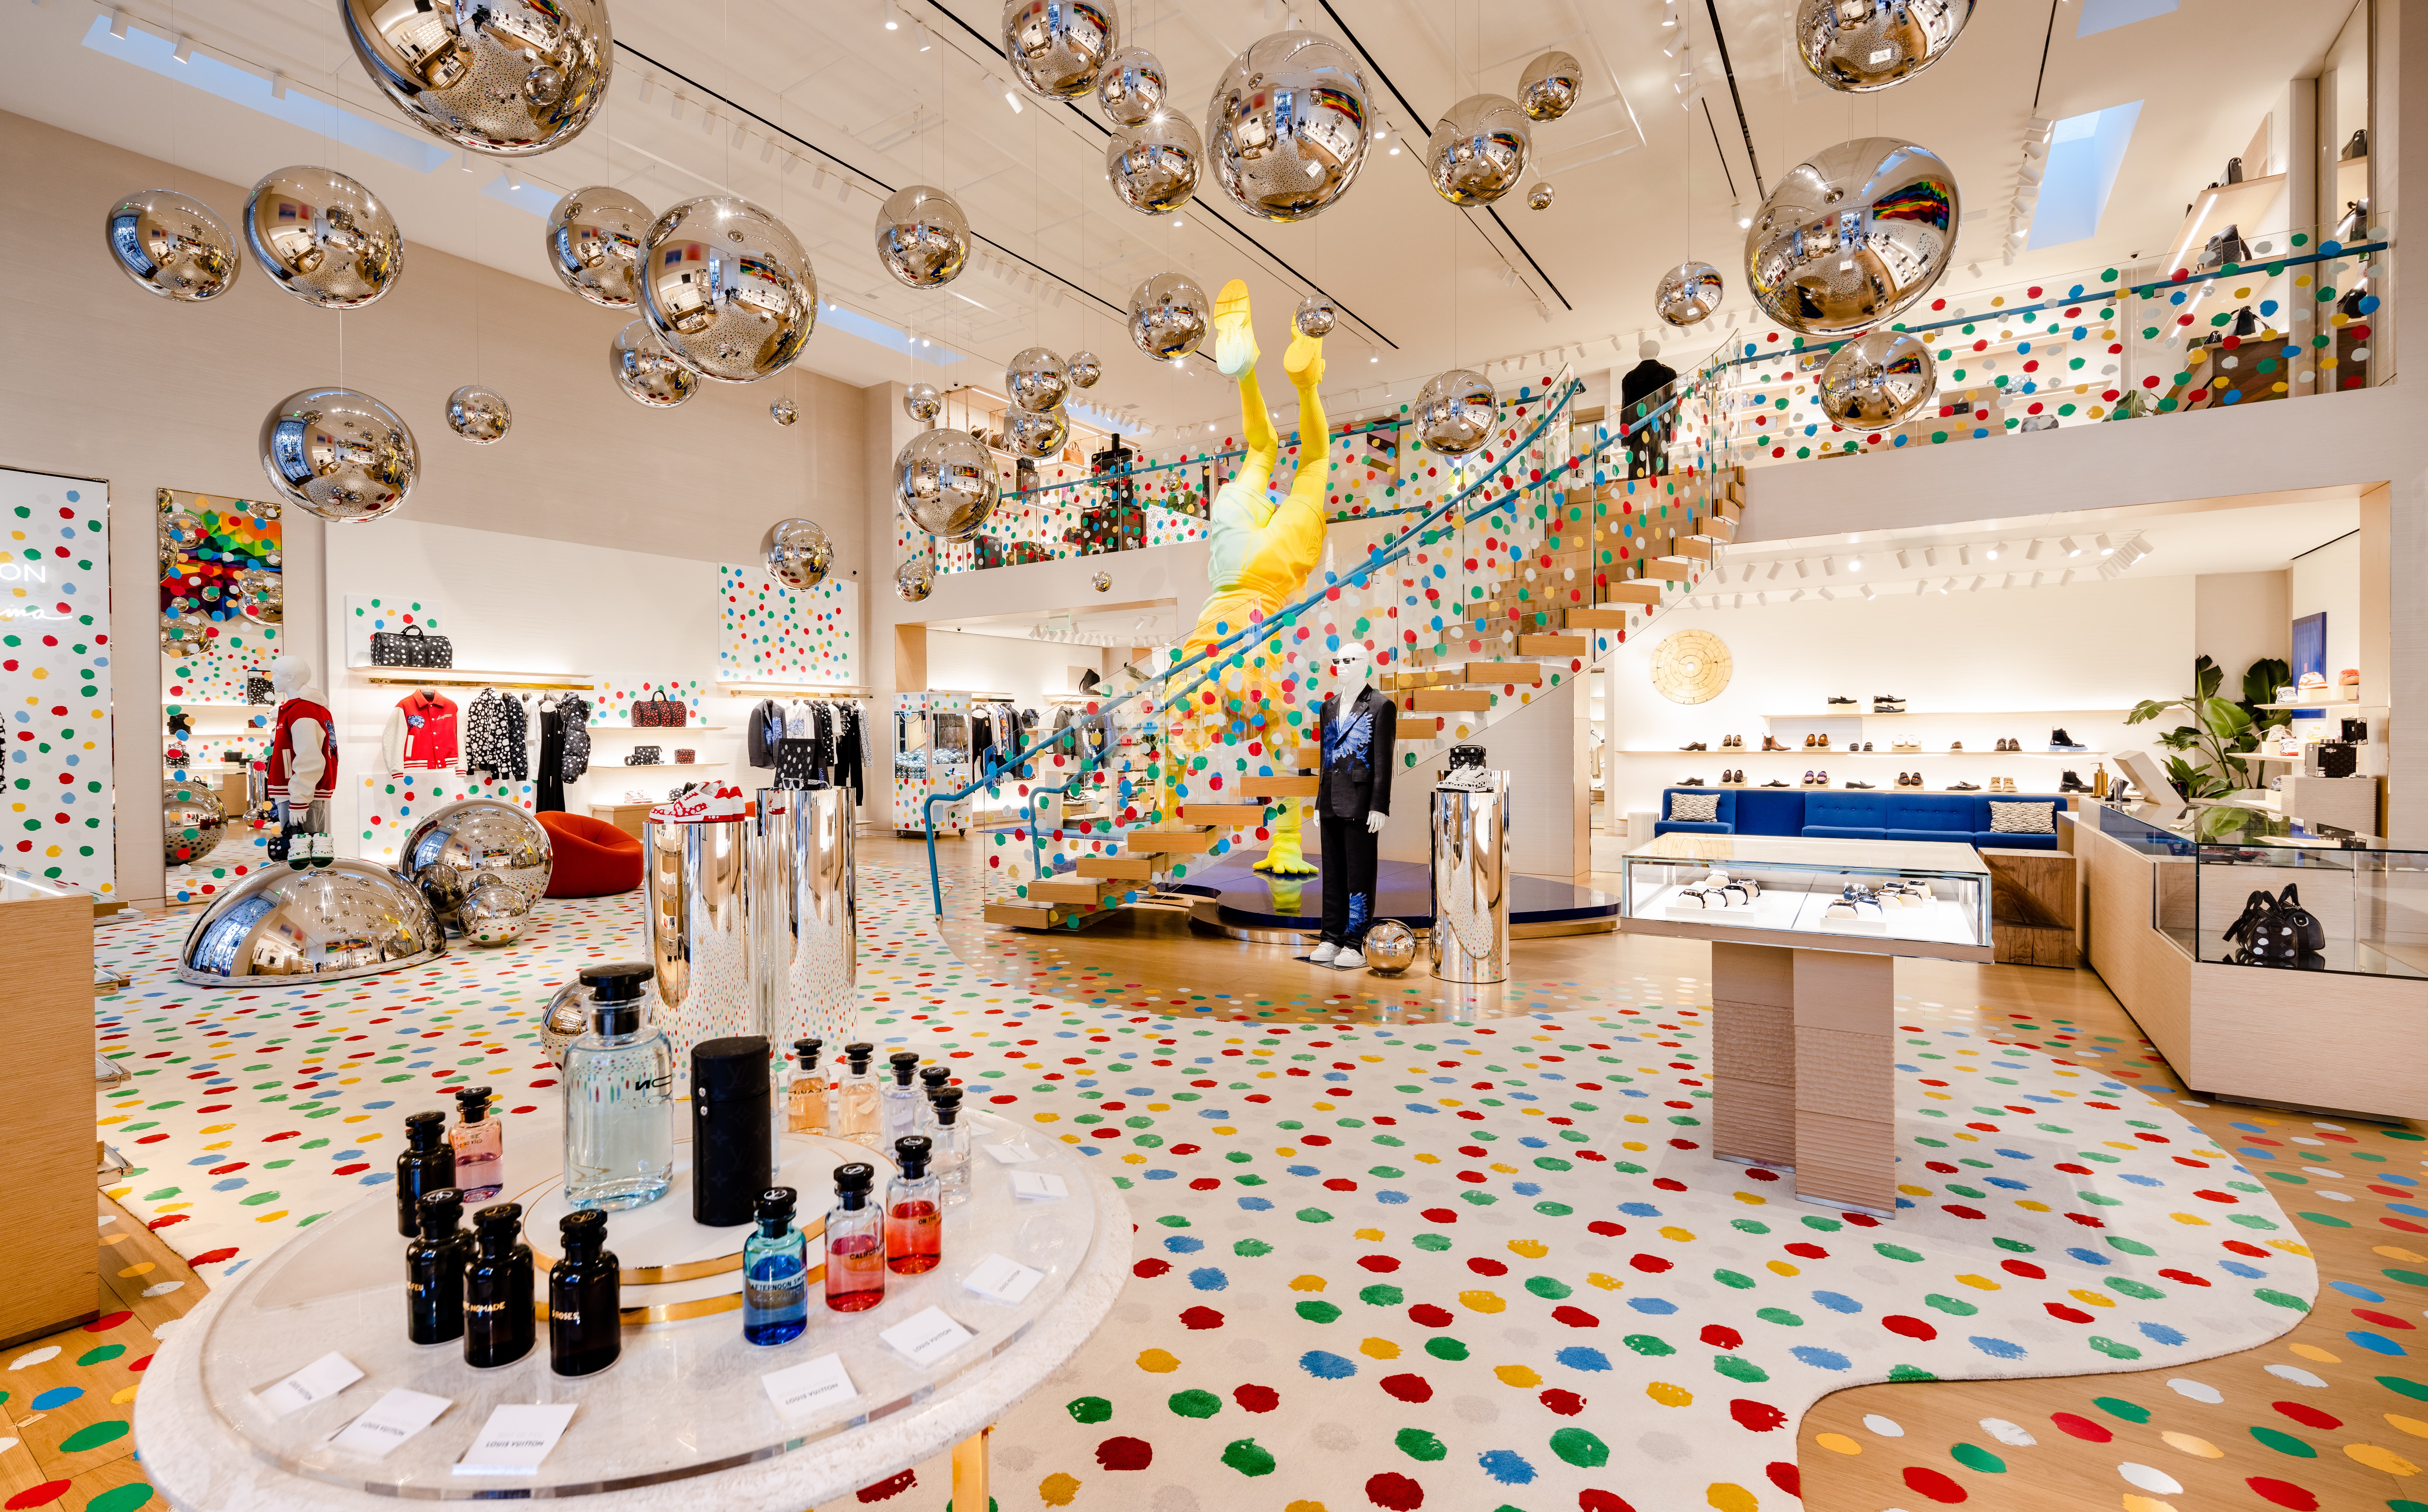 Louis Vuitton x Yayoi Kusama Collection, Presented in Dedicated Pop-Ups